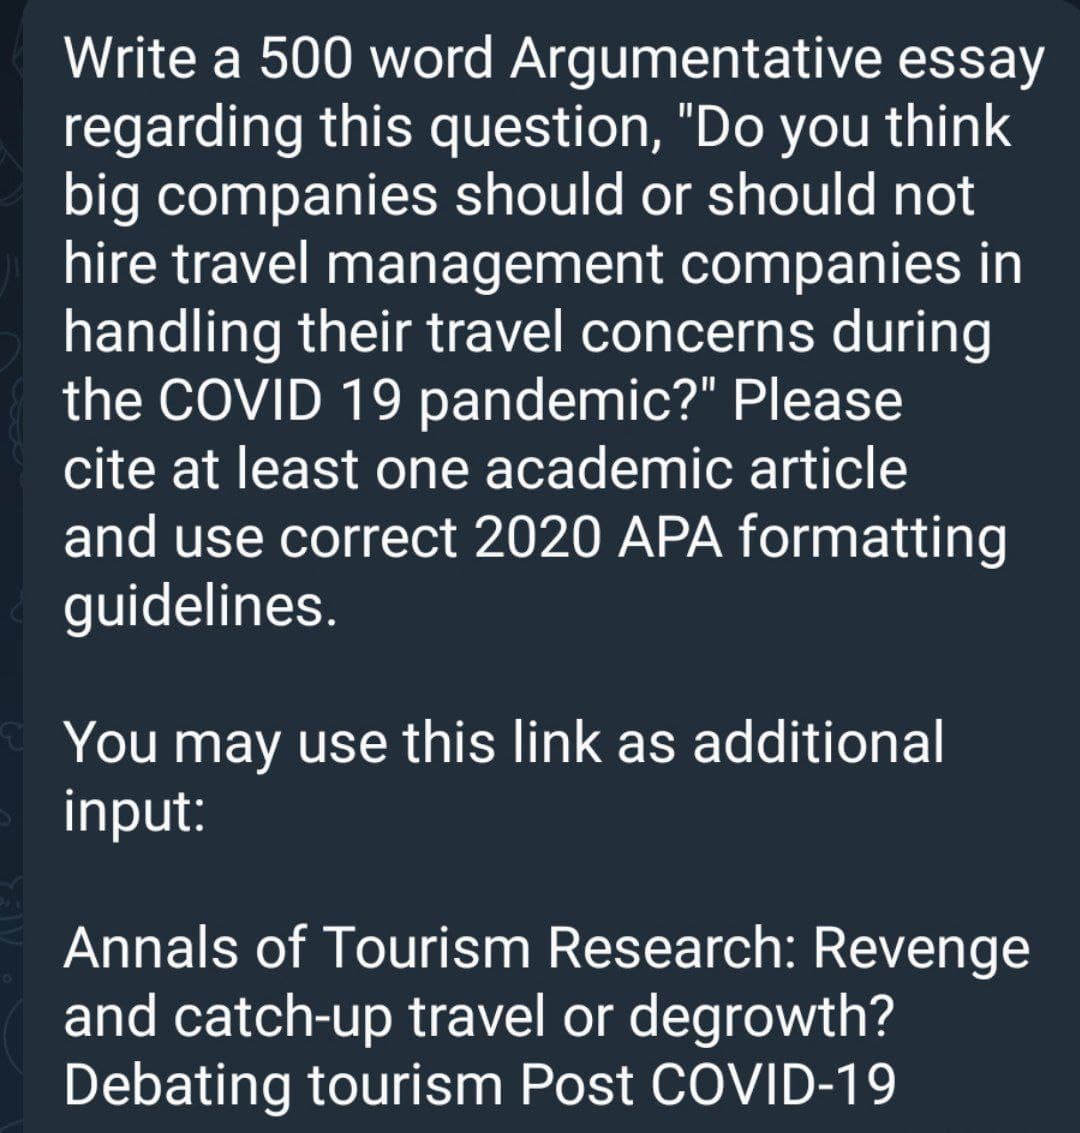 Write a 500 word Argumentative essay
regarding this question, "Do you think
big companies should or should not
hire travel management companies in
handling their travel concerns during
the COVID 19 pandemic?" Please
cite at least one academic article
and use correct 2020 APA formatting
guidelines.
You may use this link as additional
input:
Annals of Tourism Research: Revenge
and catch-up travel or degrowth?
Debating tourism Post COVID-19